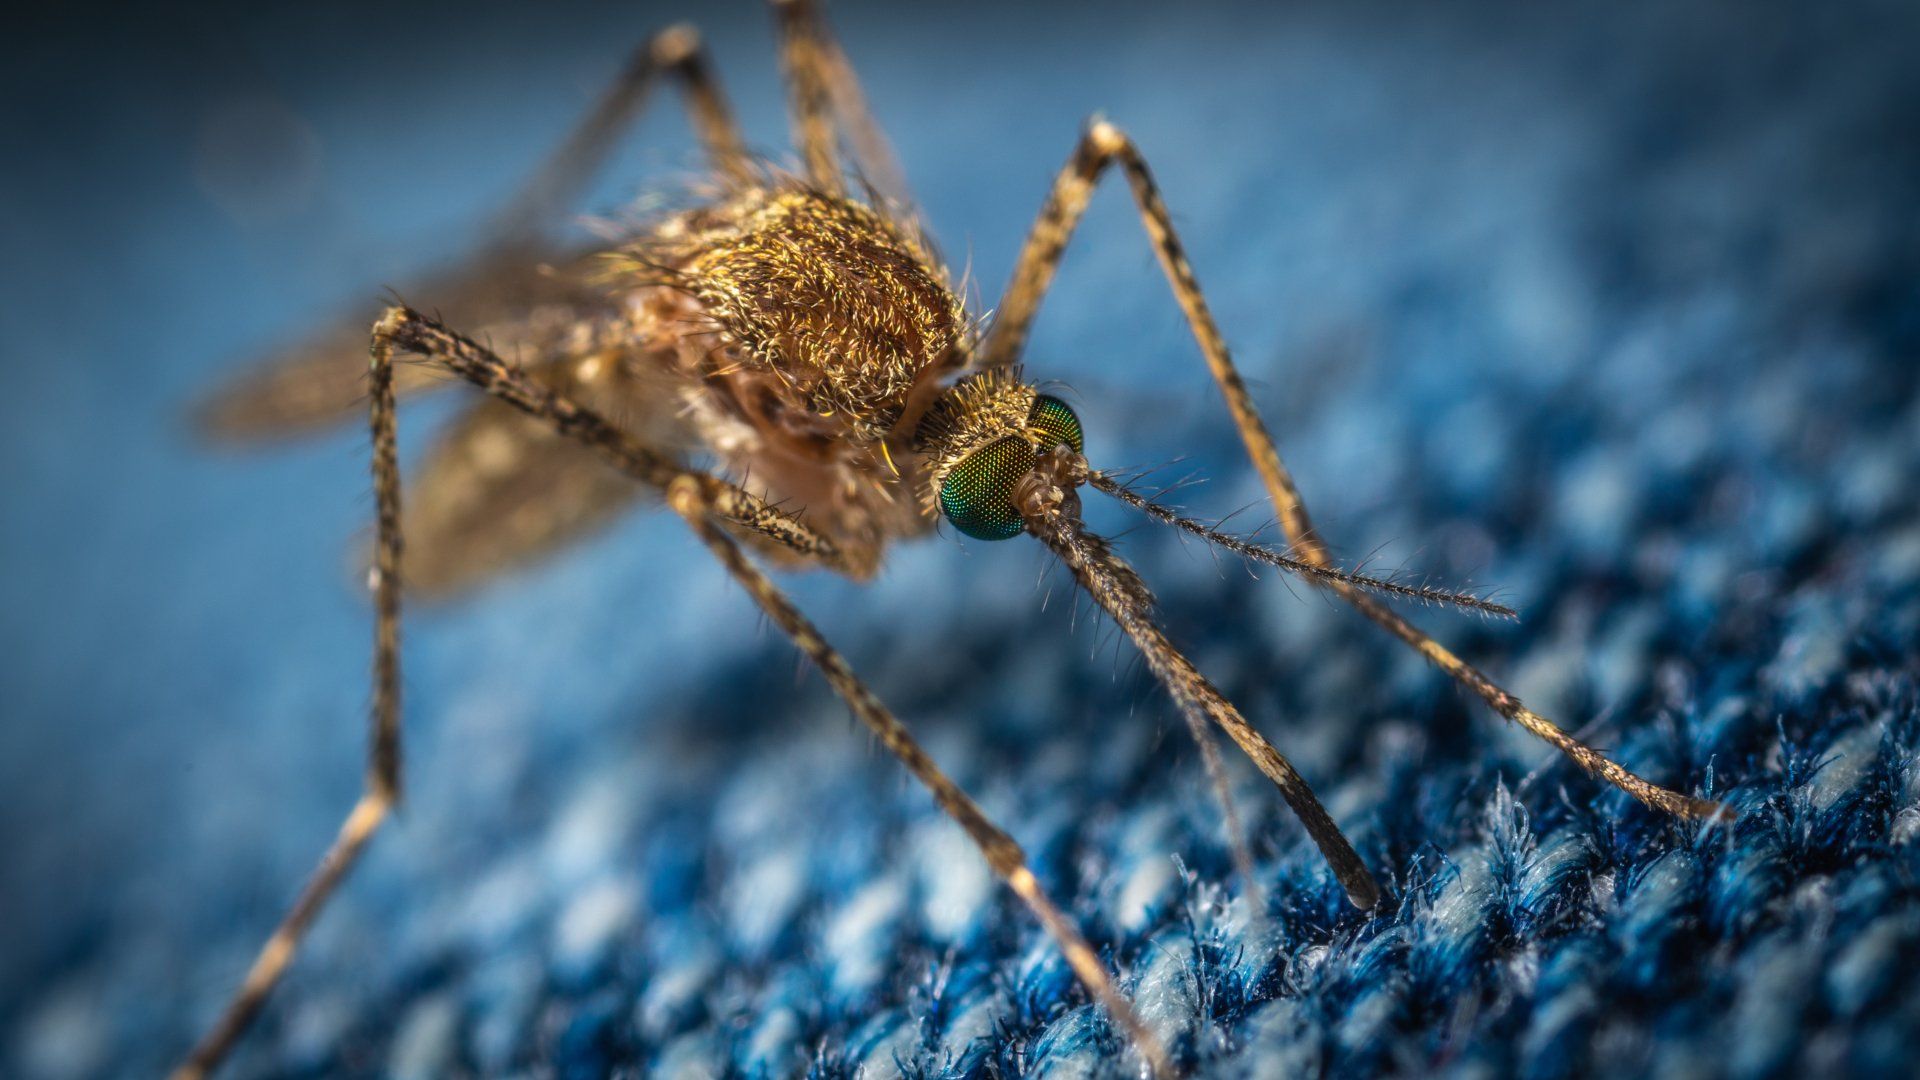 A close up of a mosquito on a blue surface.